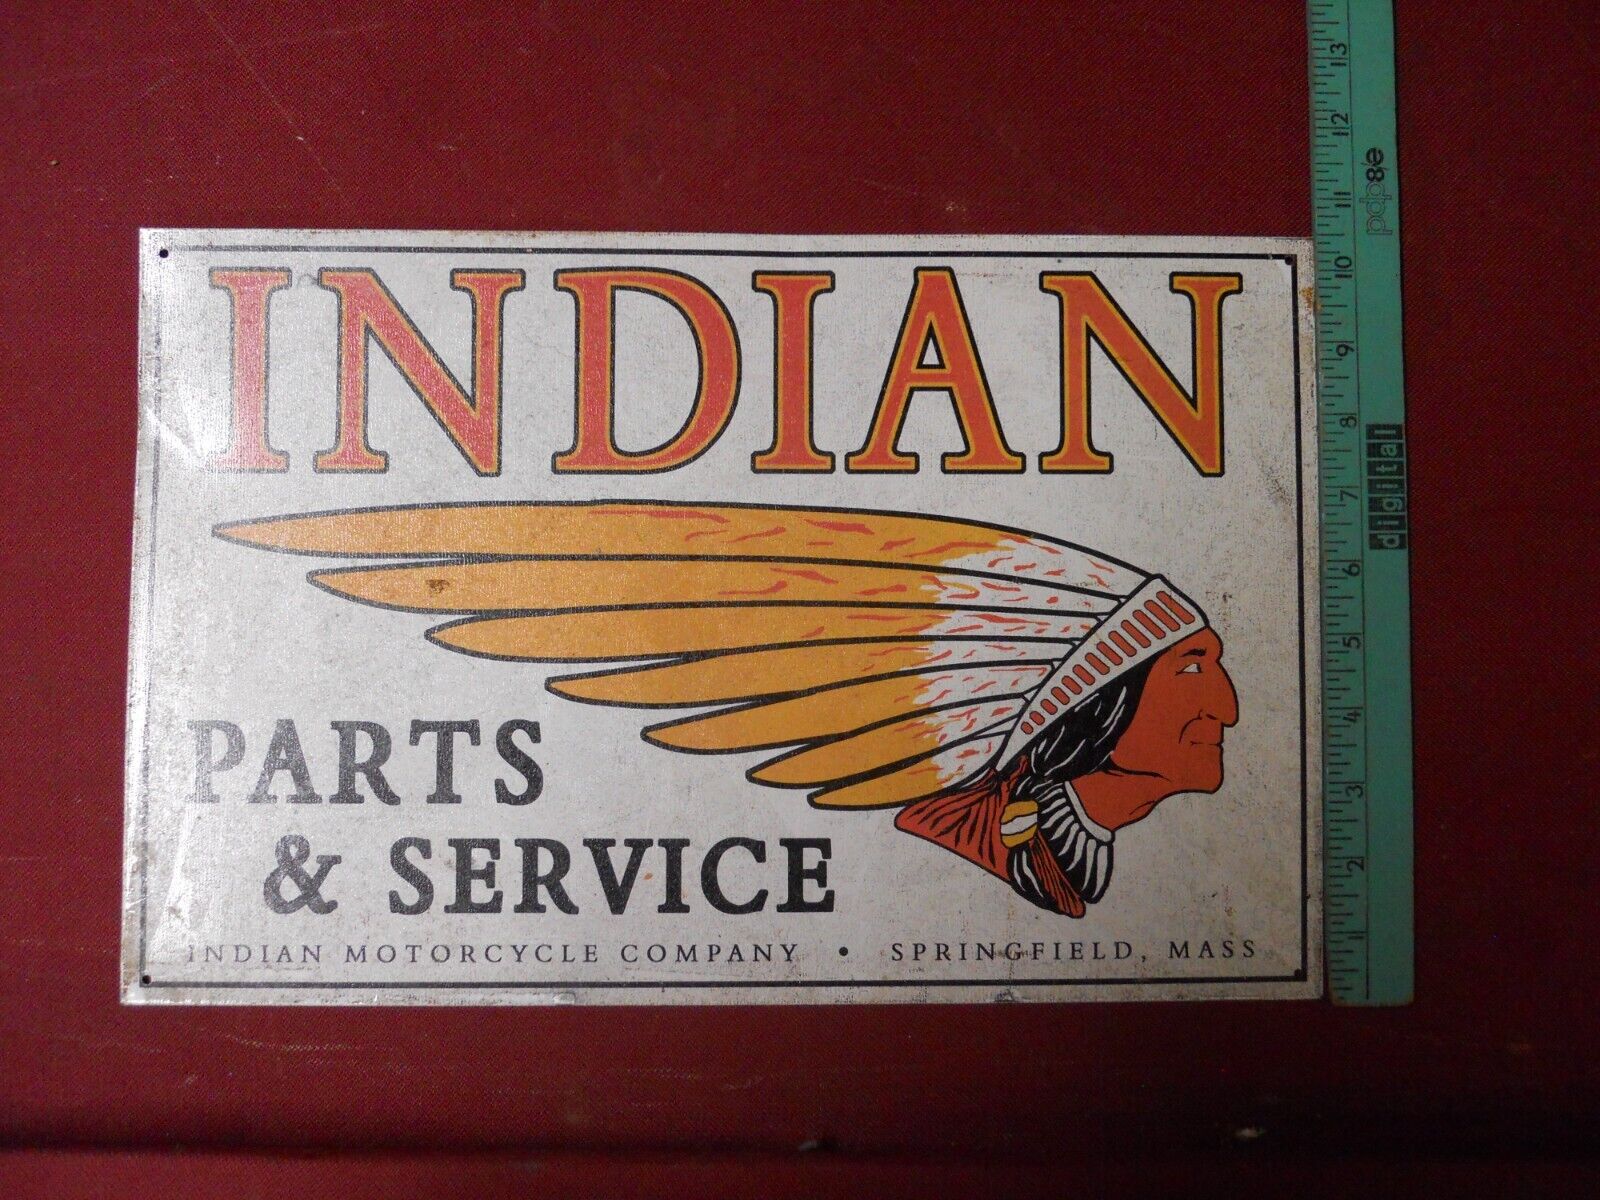 Indian Motorcyles Parts and Service Metal Advertising Sign 16x10.5 inches approx